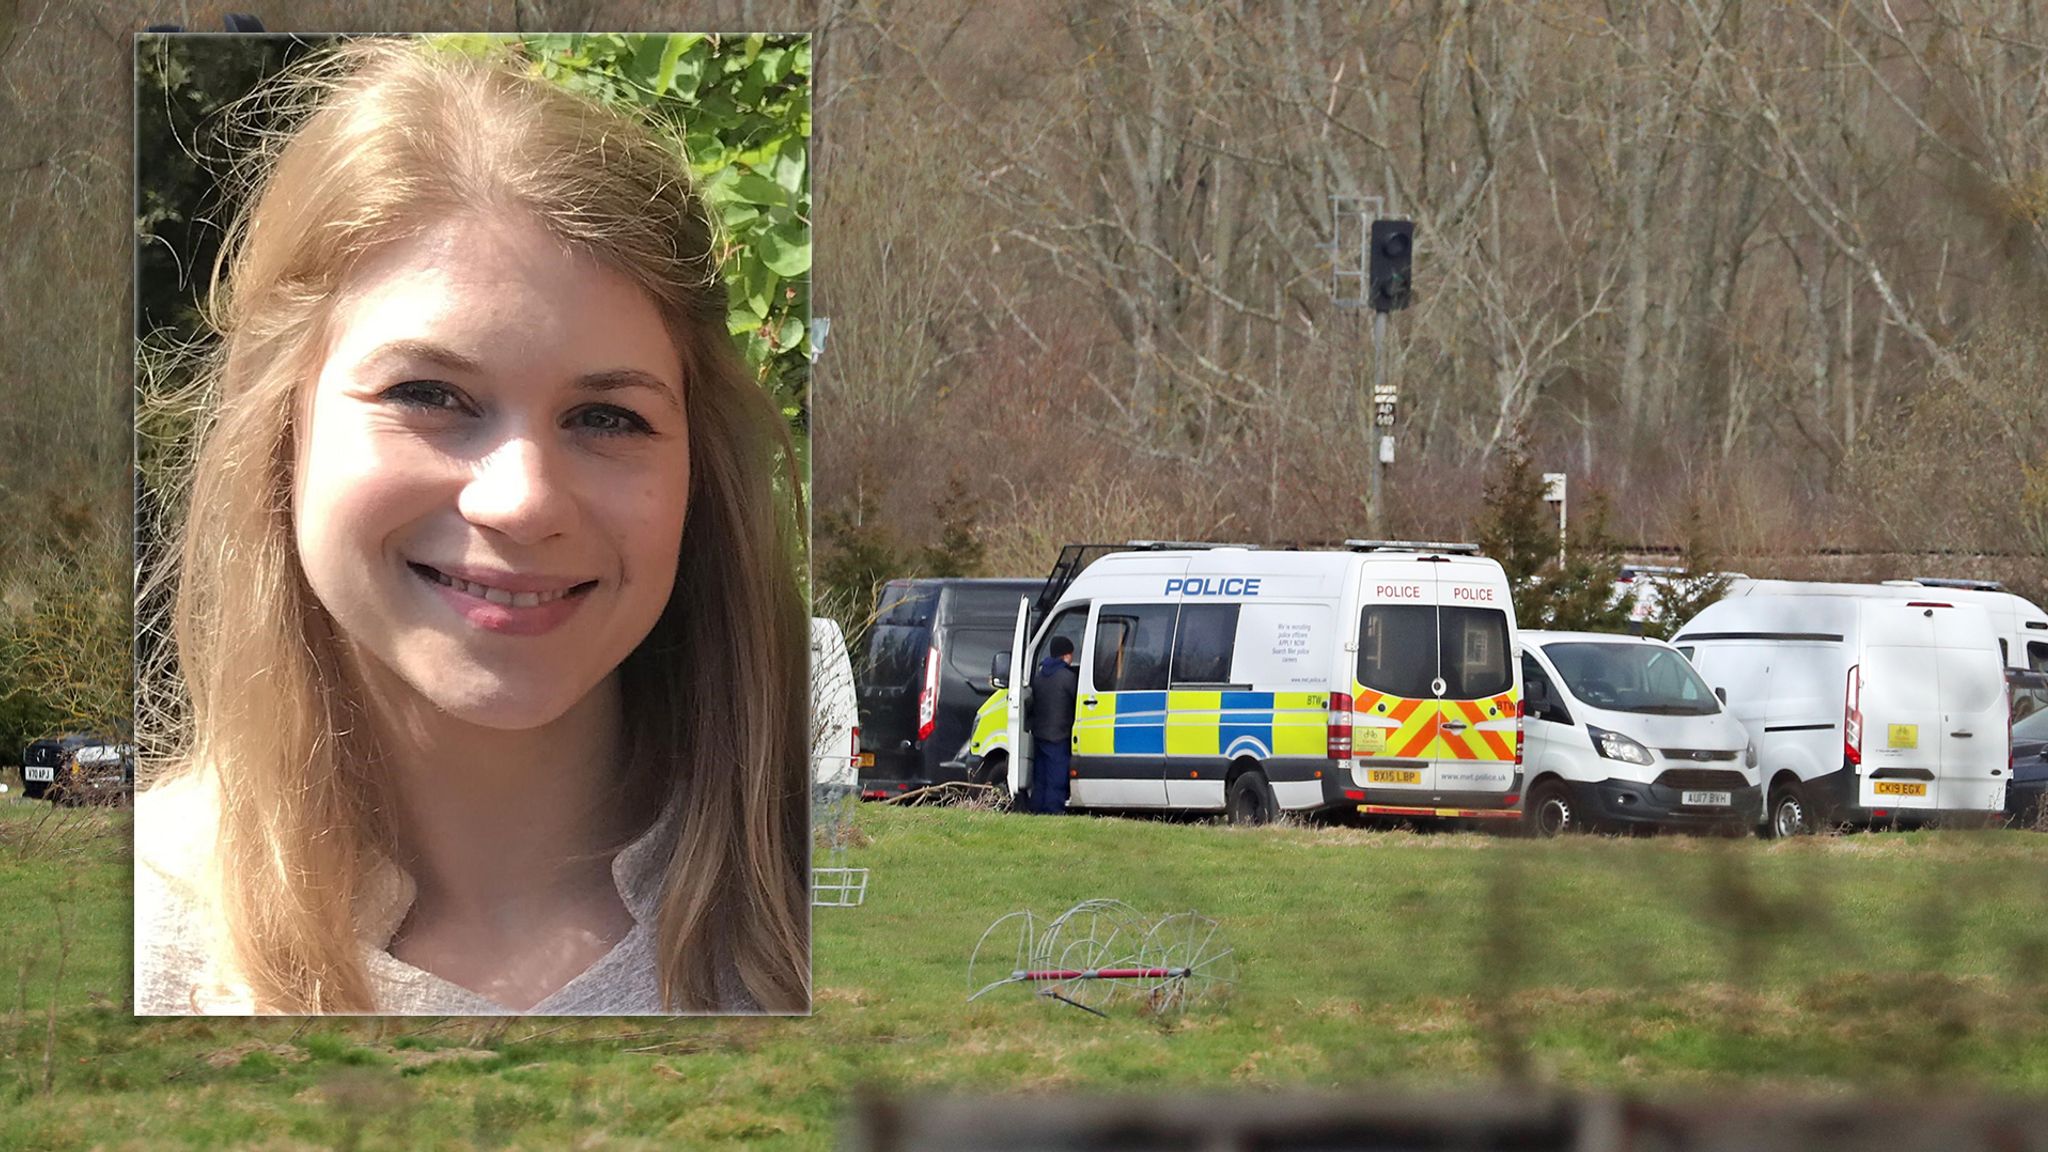 Sarah Everard disappearance: Suspect treated in hospital for head ...